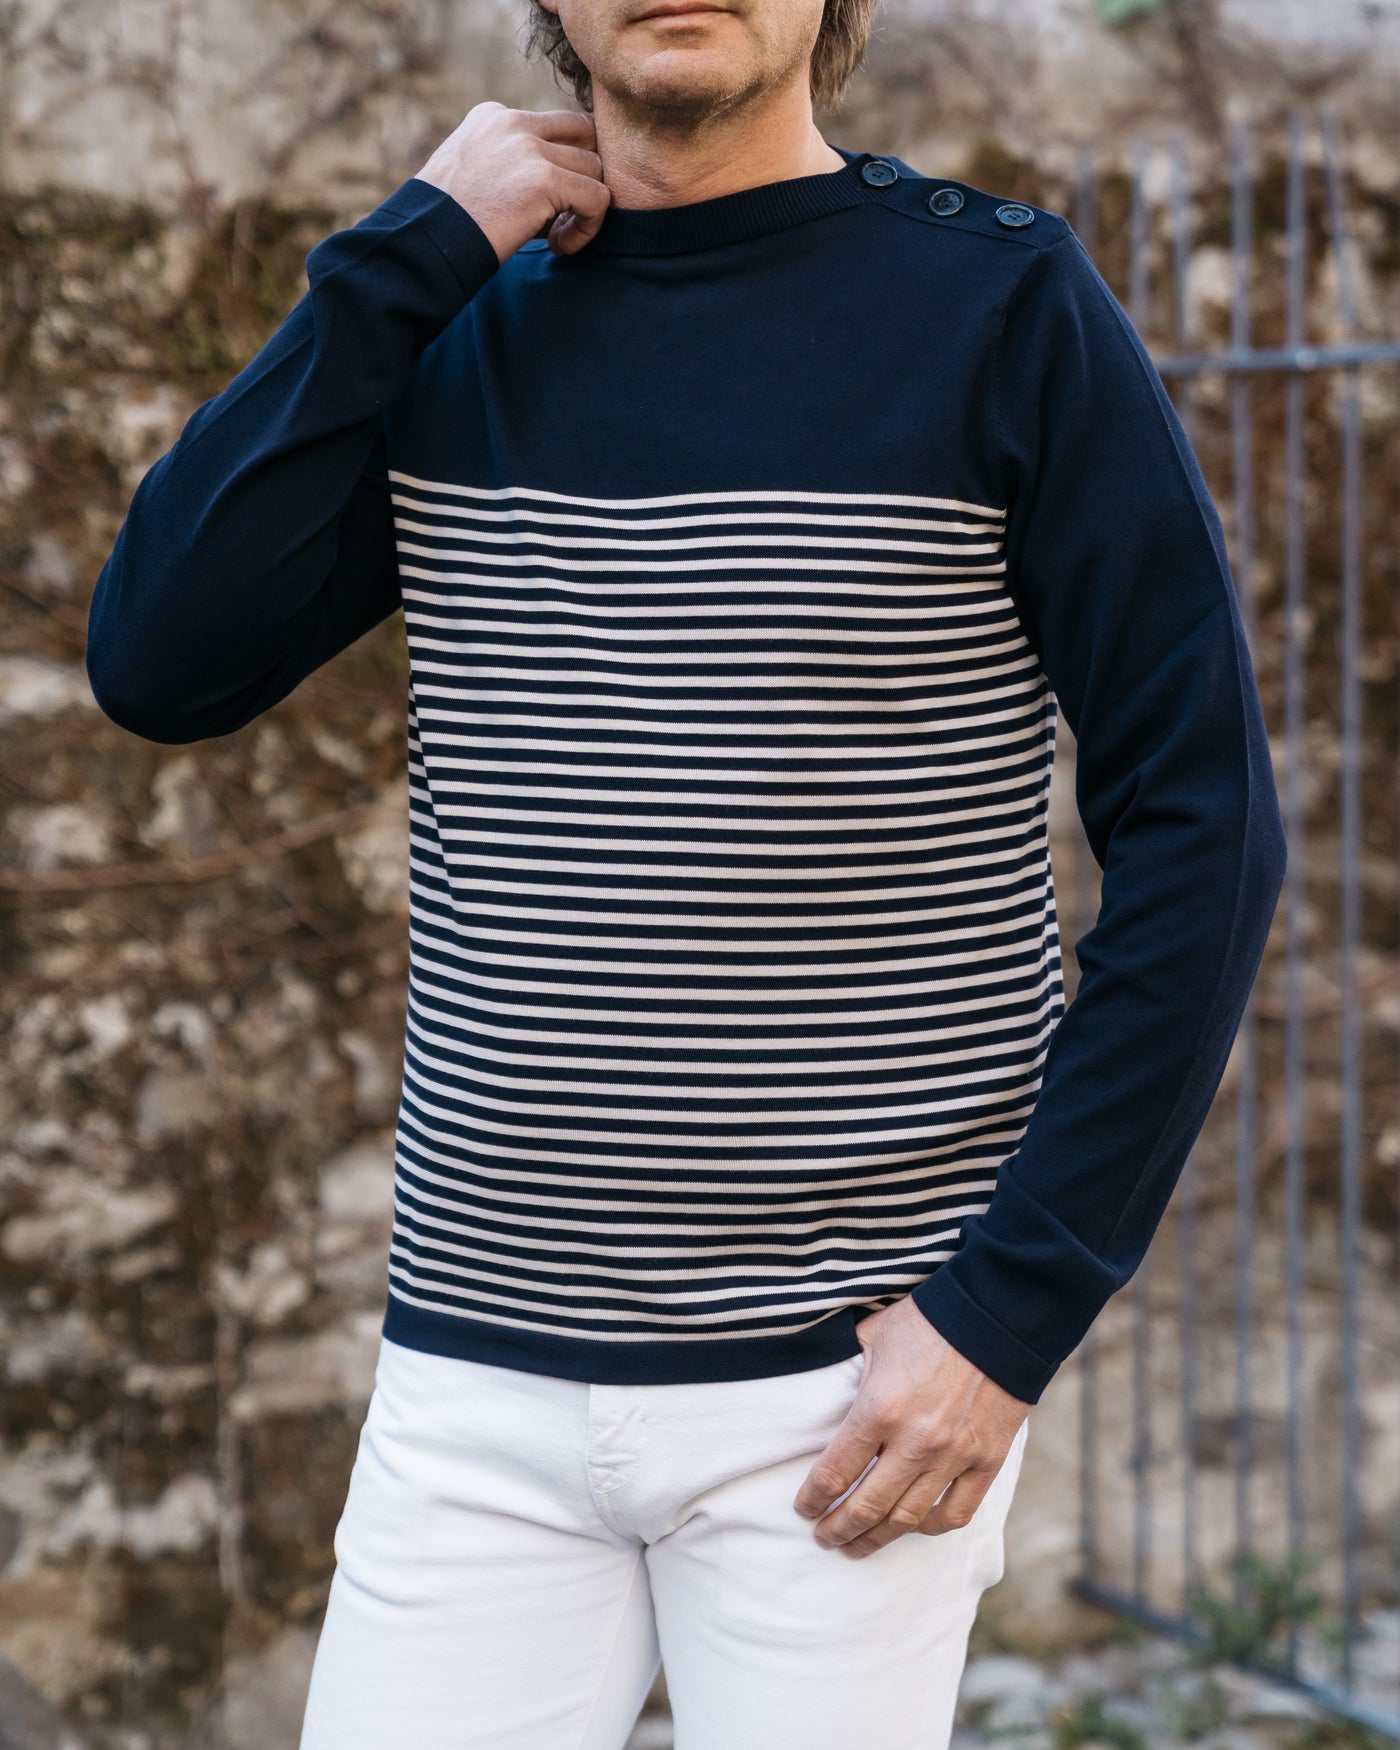 Michael long sleeved jumper with navy-style neckline (dark blue and stripe)